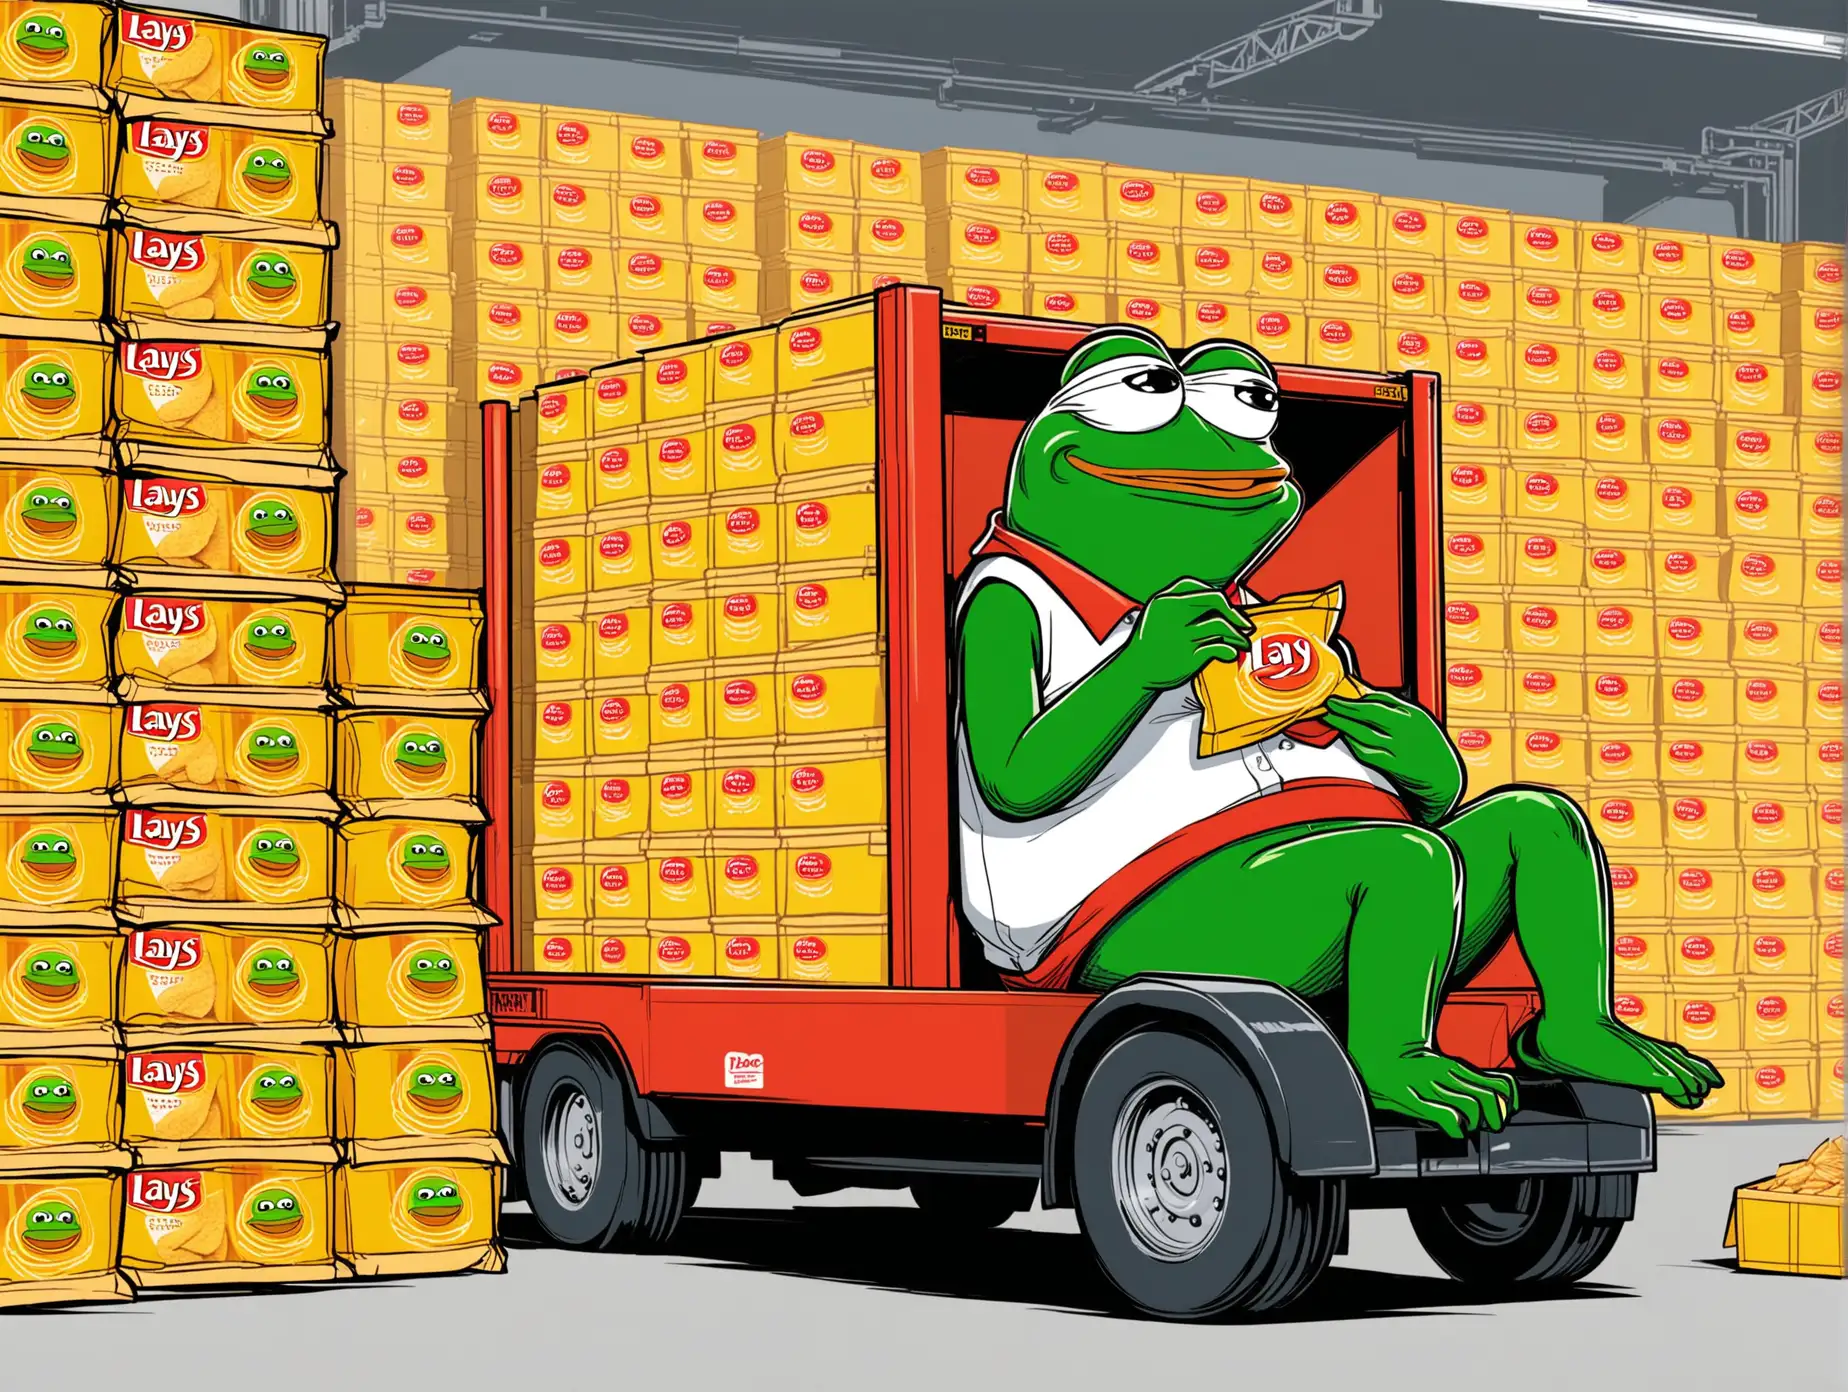 Pepe the Frog is at work, he's a loader. Pepe is loading a truck with Lays chips, sweating and trying hard.
Pepe is clad in a uniform jacket, loading up a Lays warehouse. He is carefully stacking boxes of chips into the truck, his face is a reflection of diligence and focus on his work.
The scene could be colored in Lays corporate colors - yellow and red. The background might be filled with details, such as other boxes of chips, conveyors, and sorting equipment. Pepe might be portrayed with a cart or a forklift.